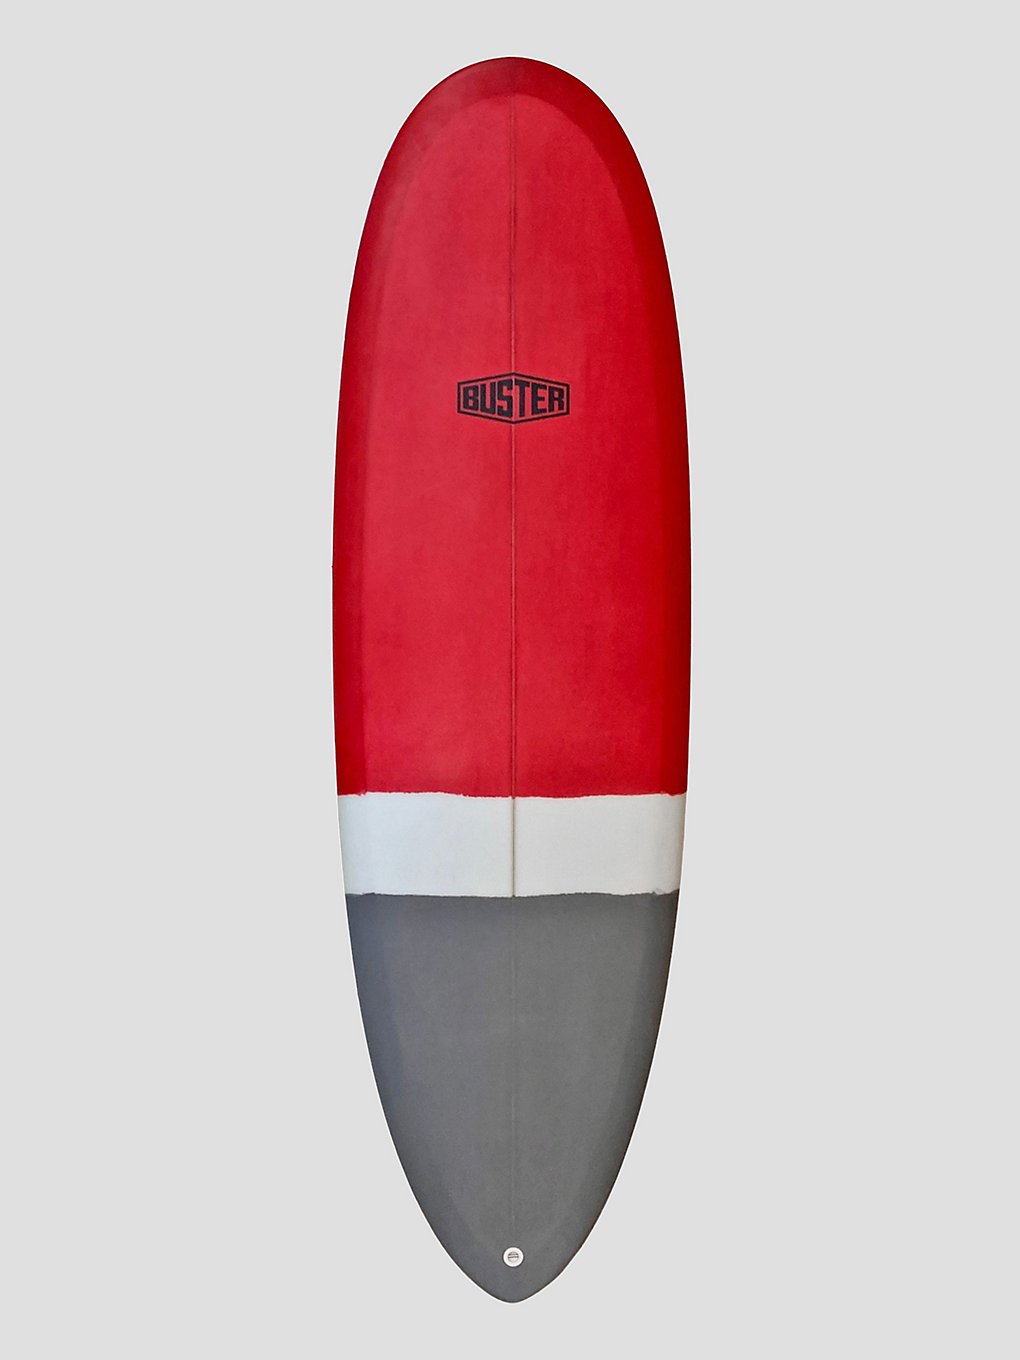 buster 60 pinnacle surfboard rot weiss/rot